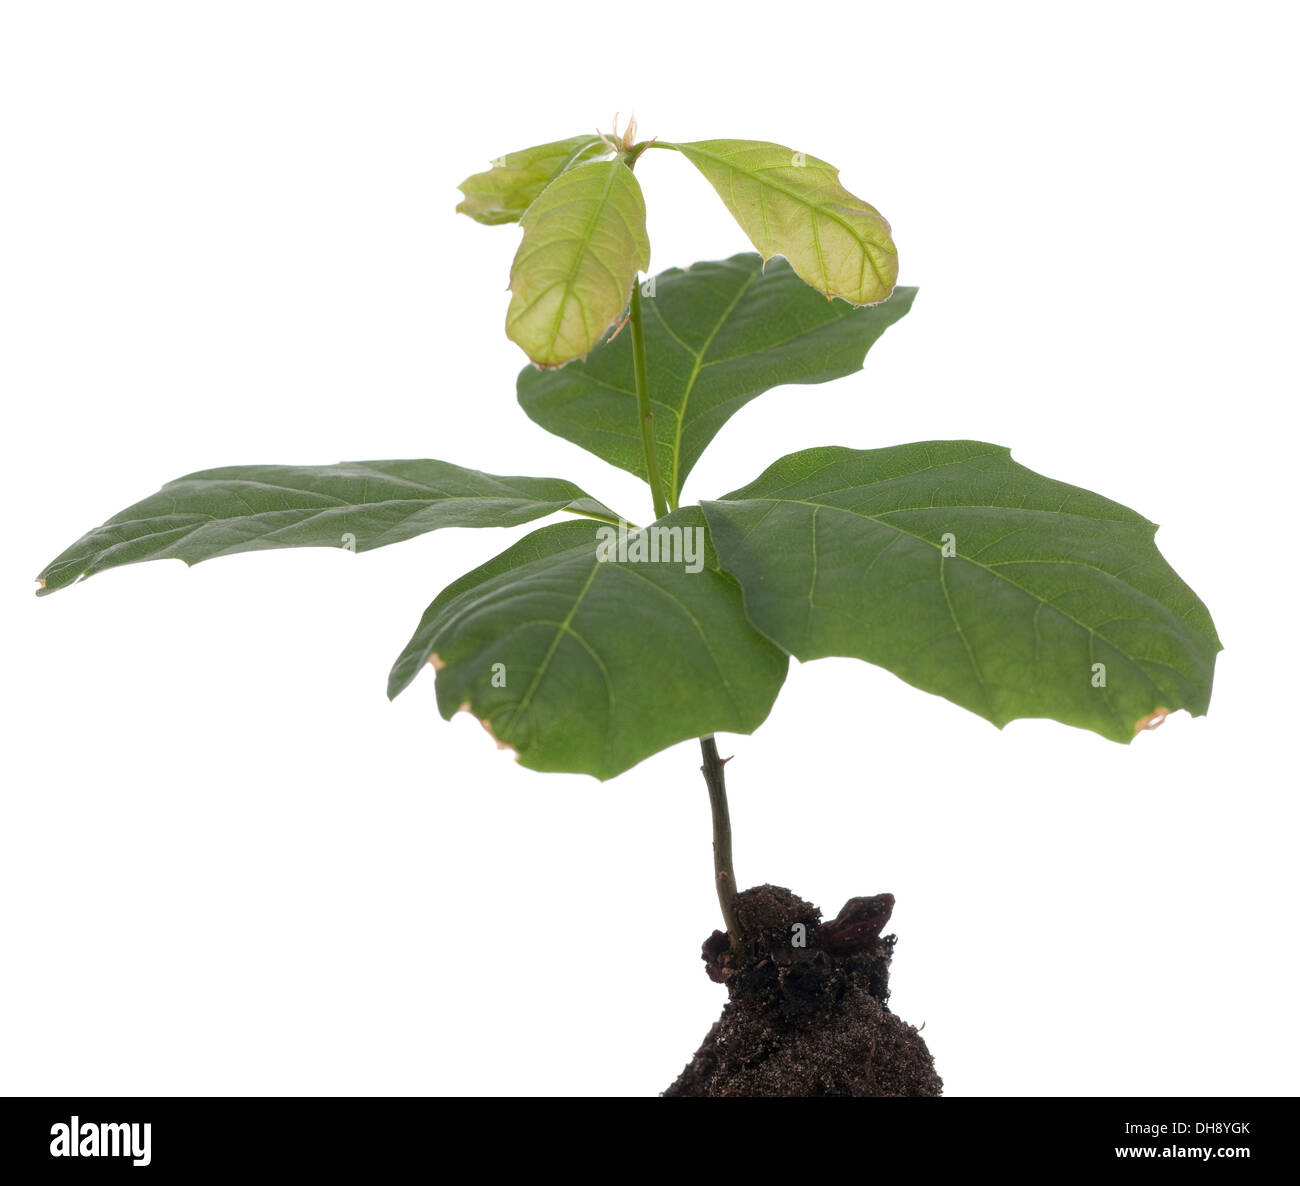 young oak seedling grows in soil on white Stock Photo